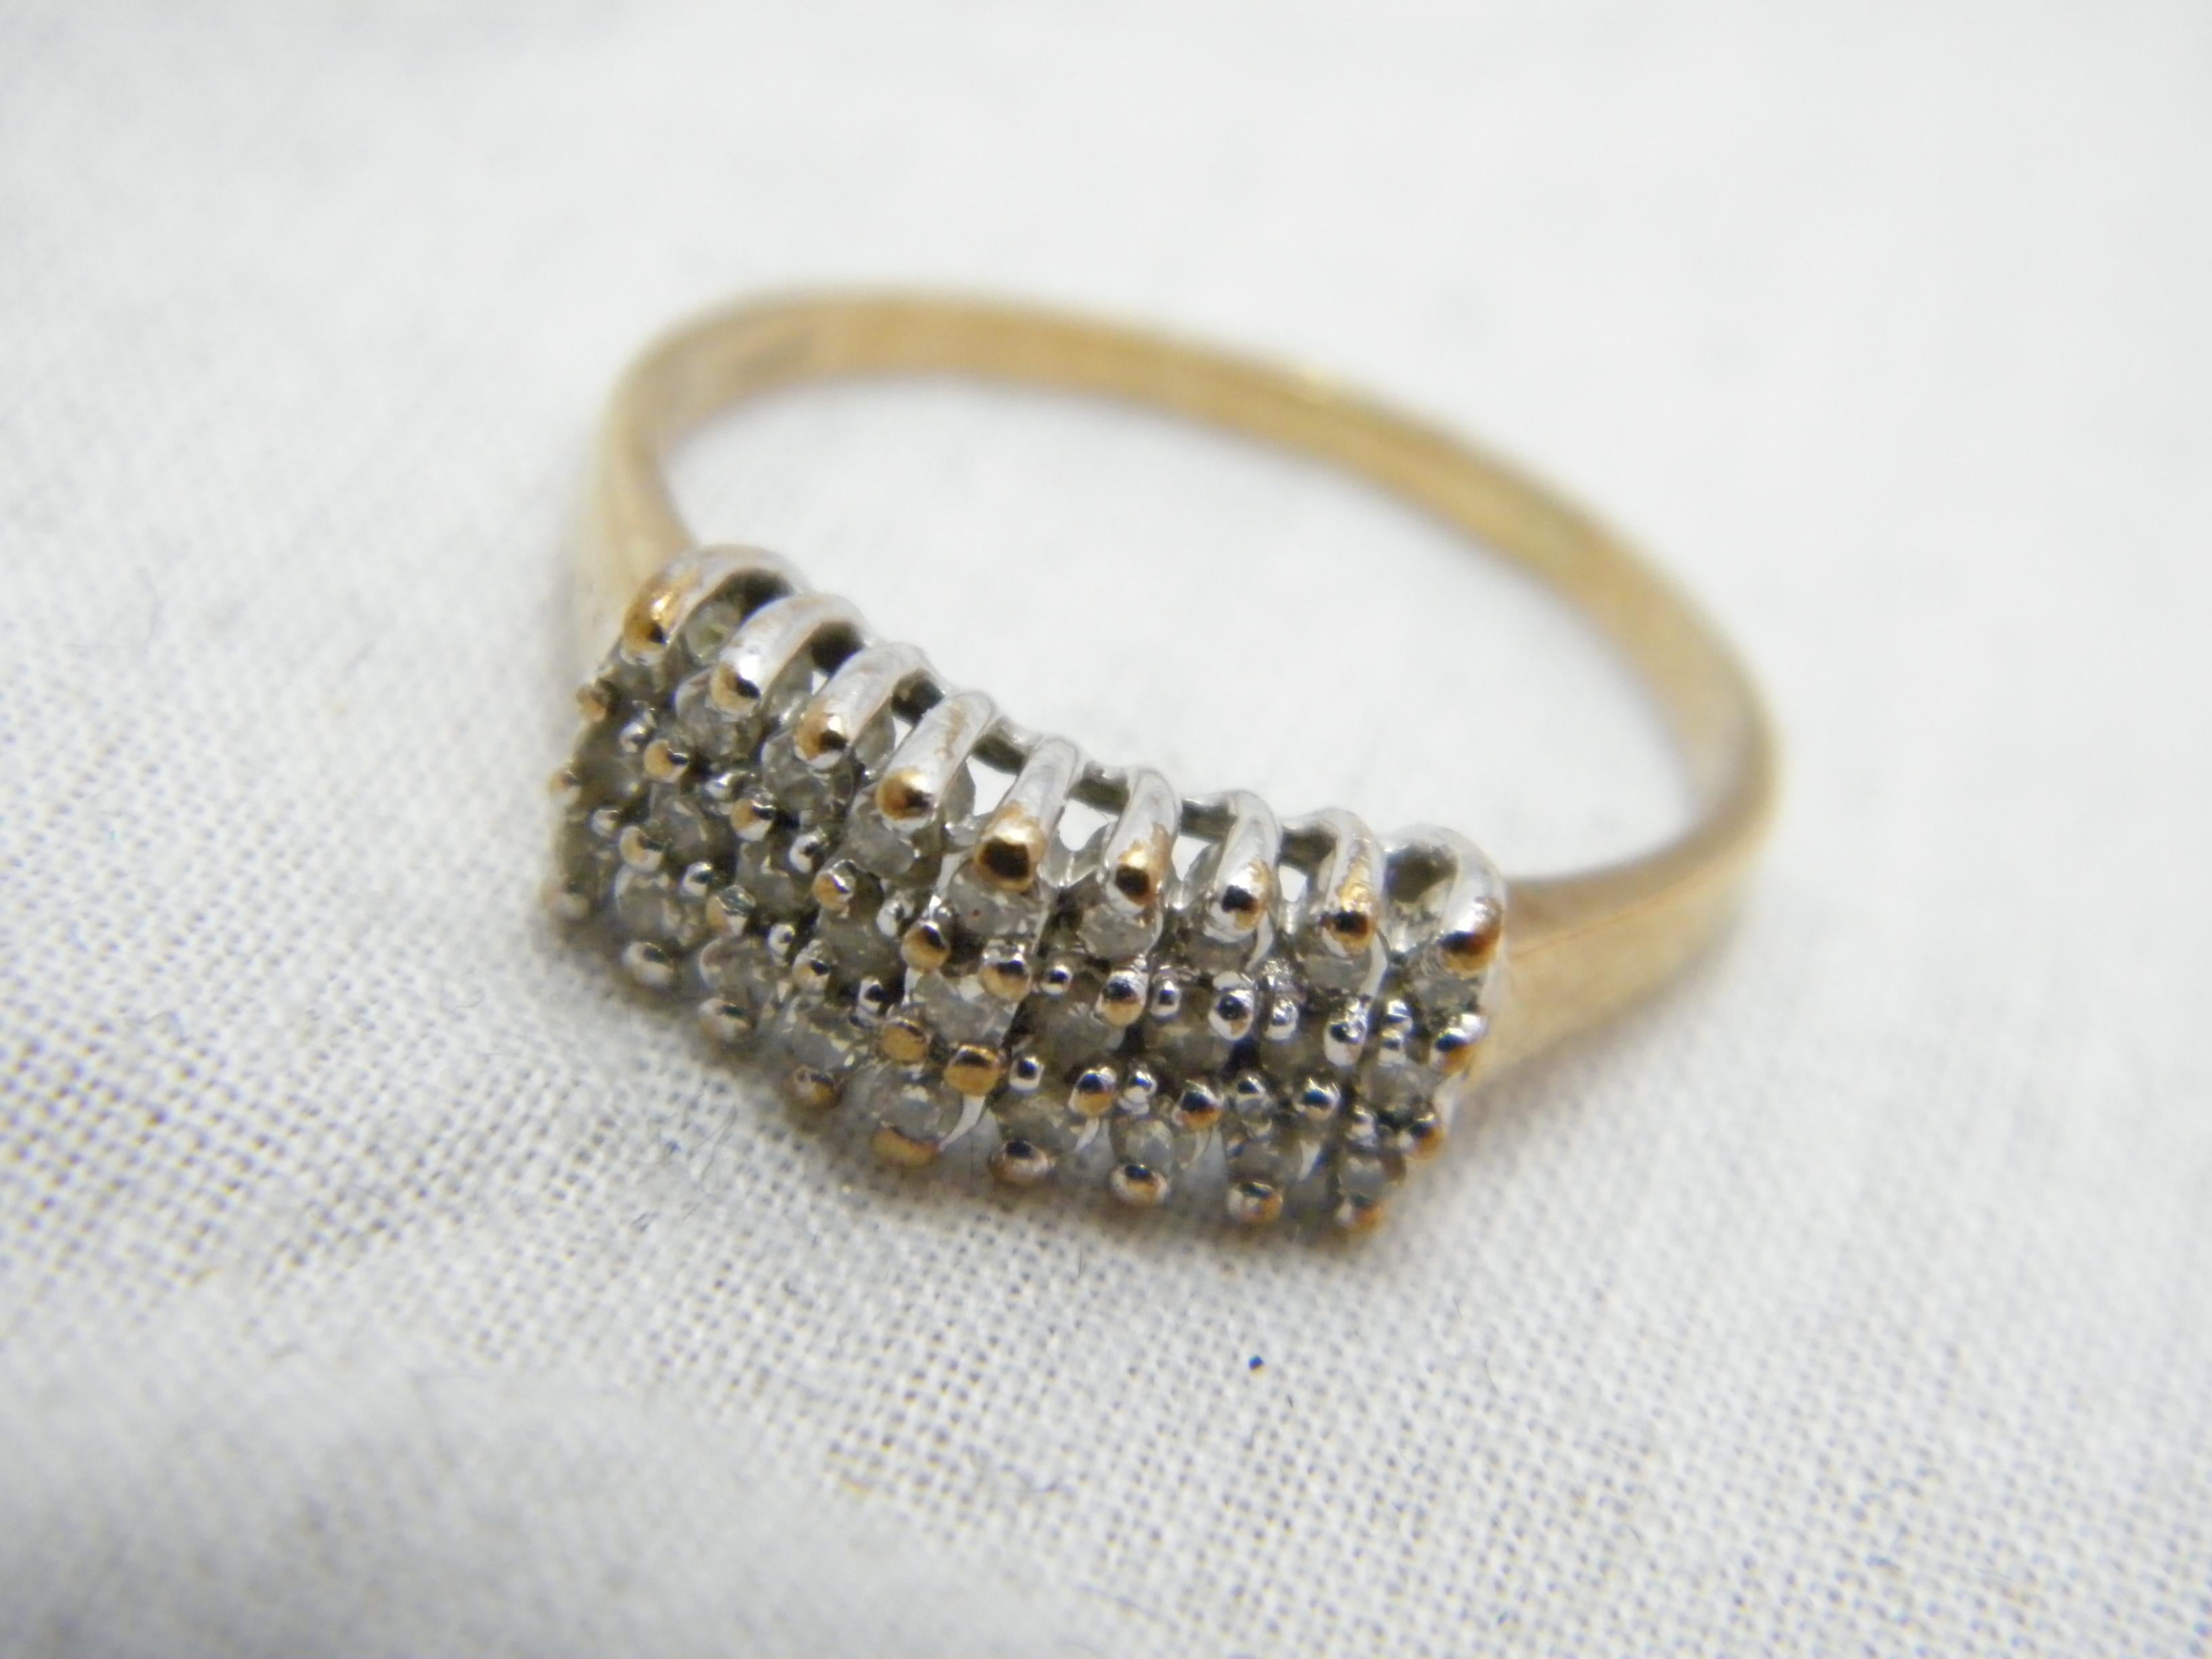 If you have landed on this page then you have an eye for beauty.

On offer is this gorgeous

9CT HEAVY GOLD DIAMOND CLUSTER GALLERIED KEEPER RING

DETAILS
Material: 9ct 375/000 Yellow Gold
This ring has a sturdy shank hence ideal if resizing